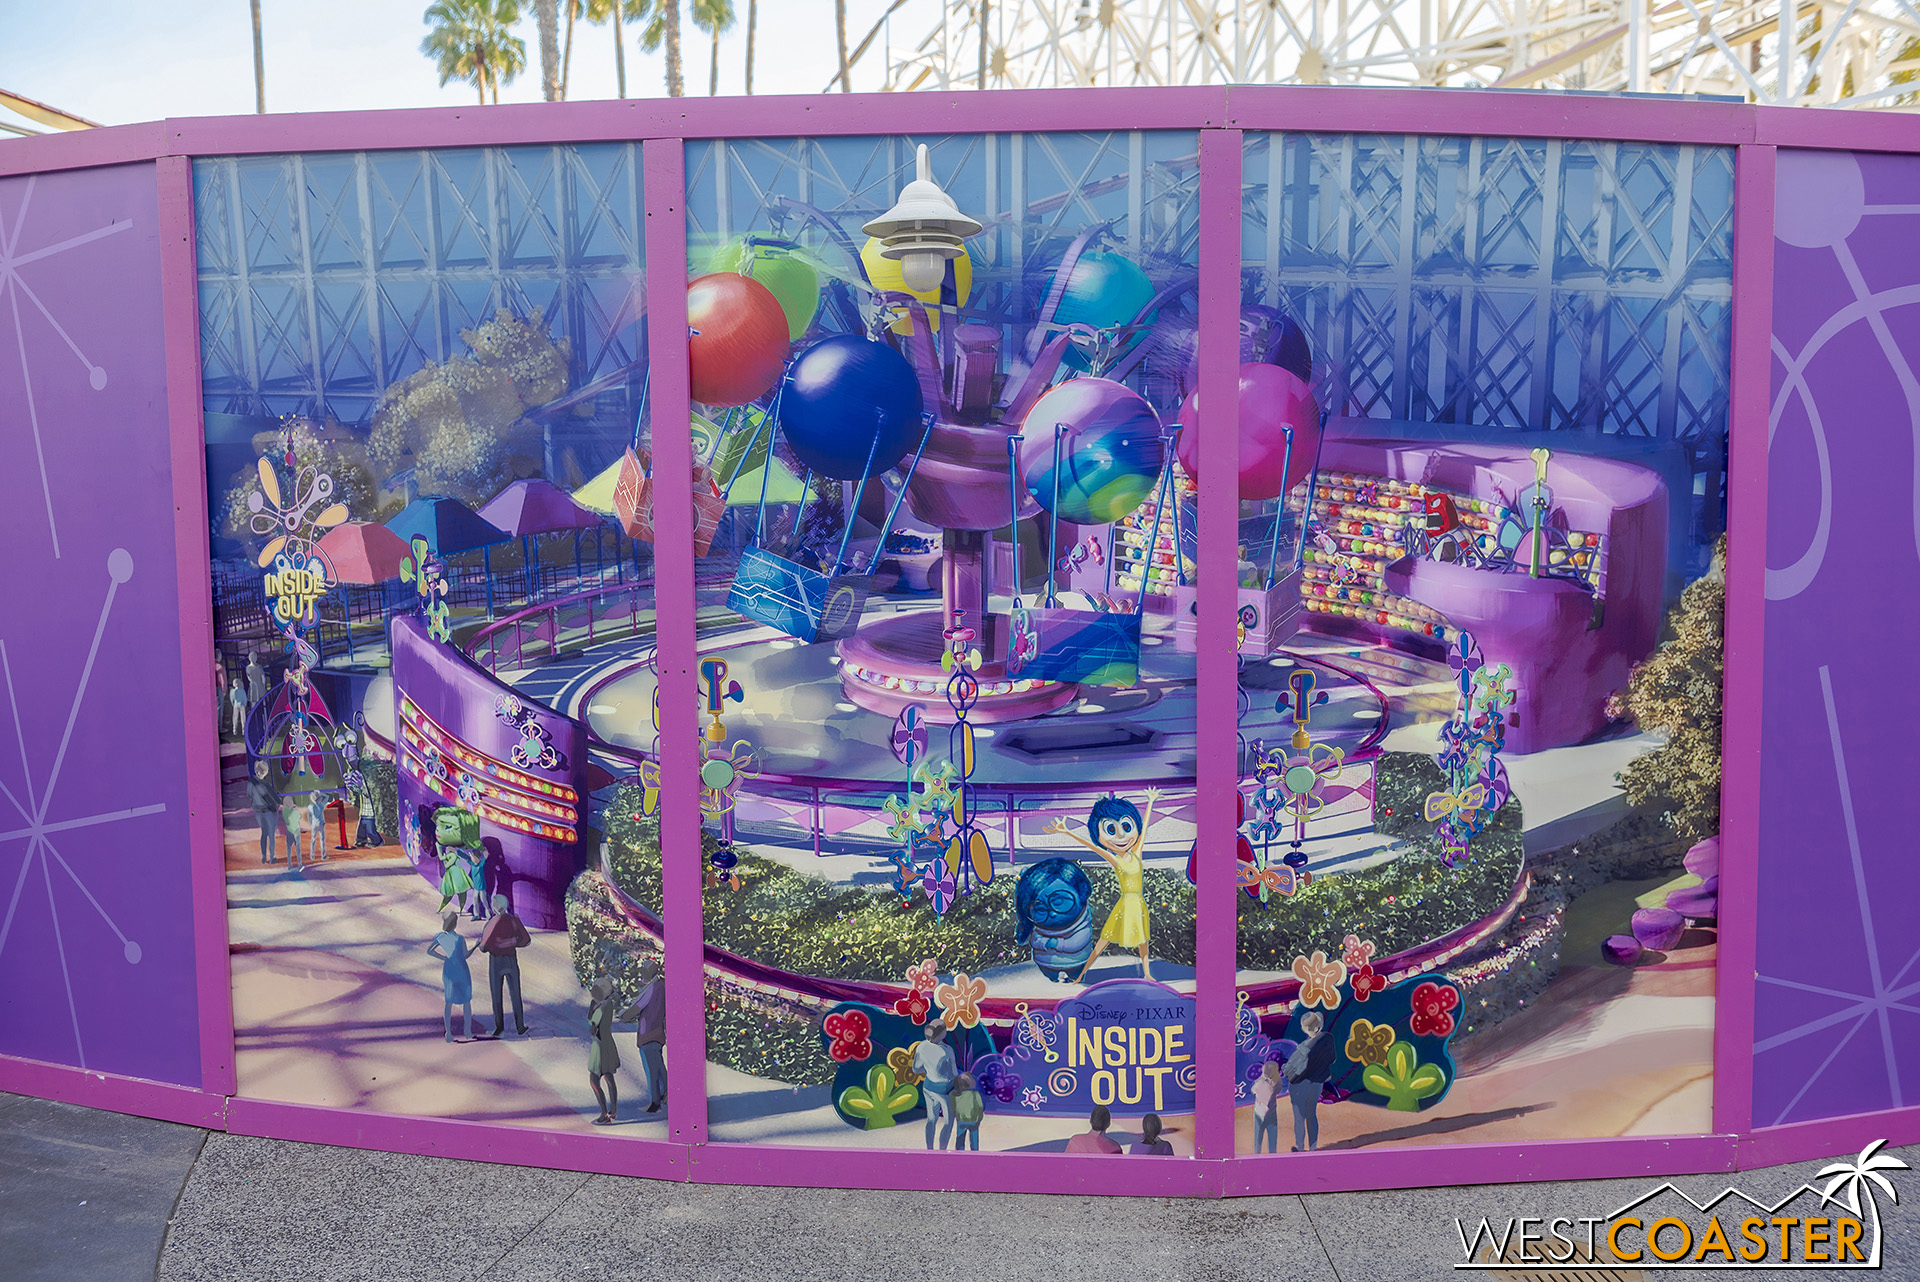  They’ve also added an enlargement of the rendering of the ride. 